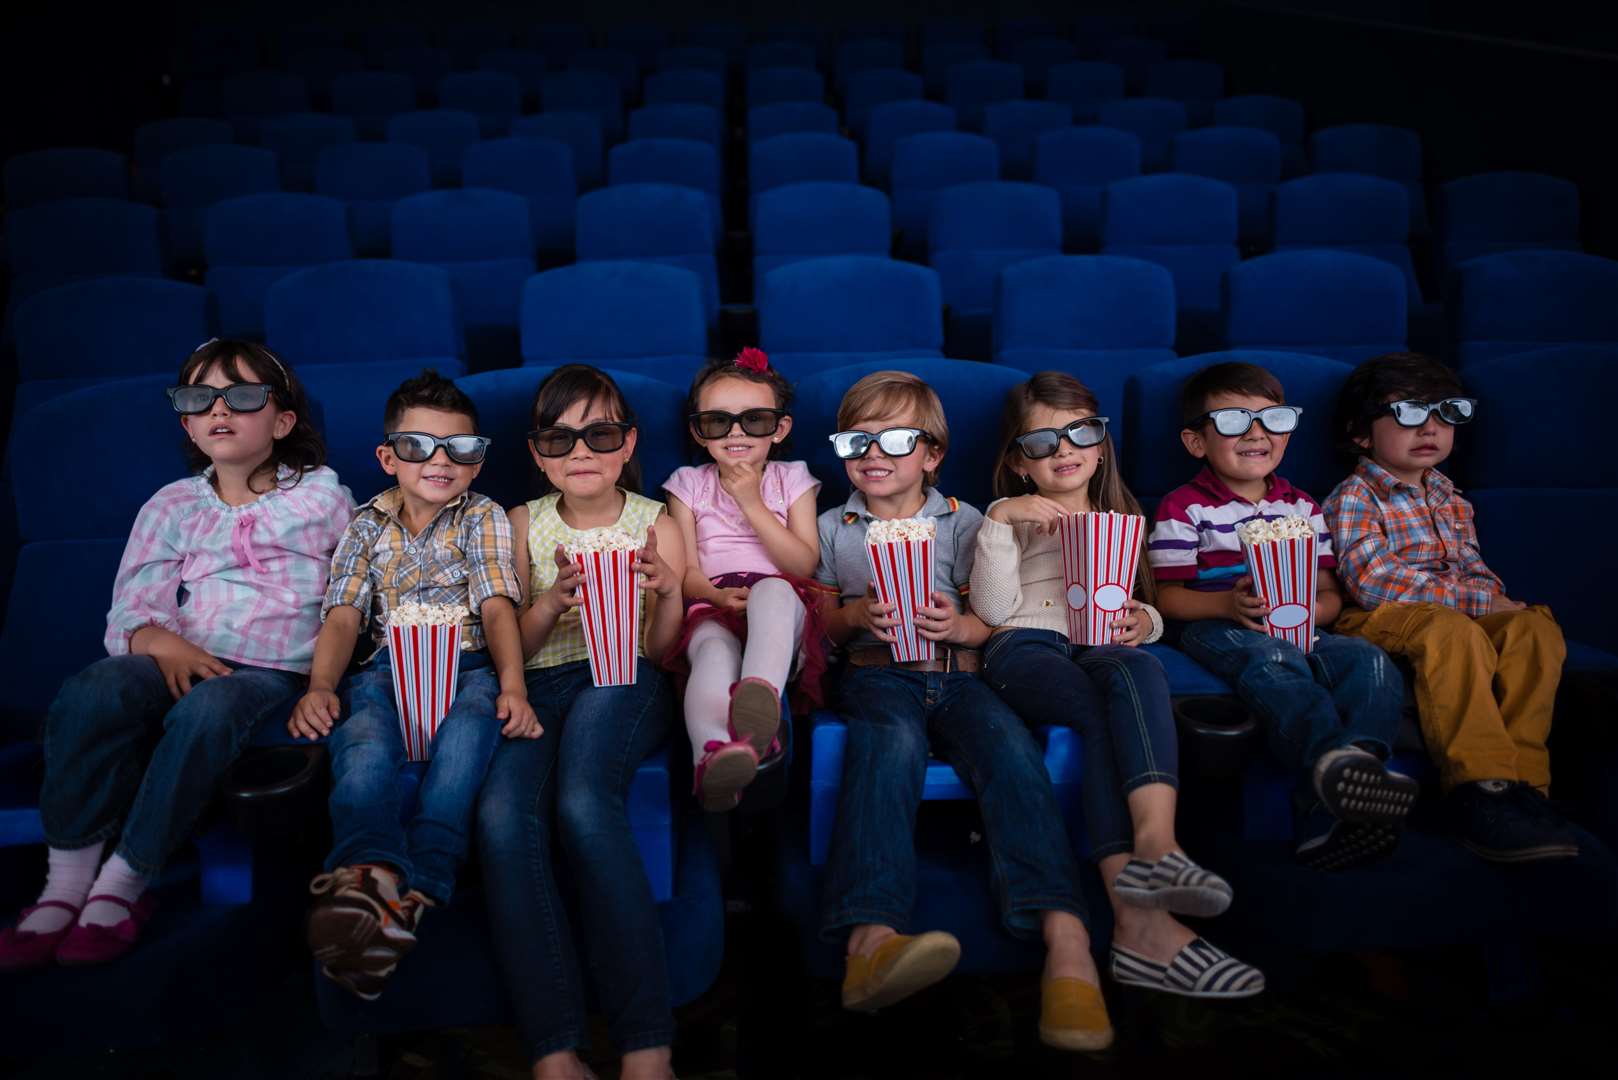 Kids Club cinema tickets are just over £3 each for all family members